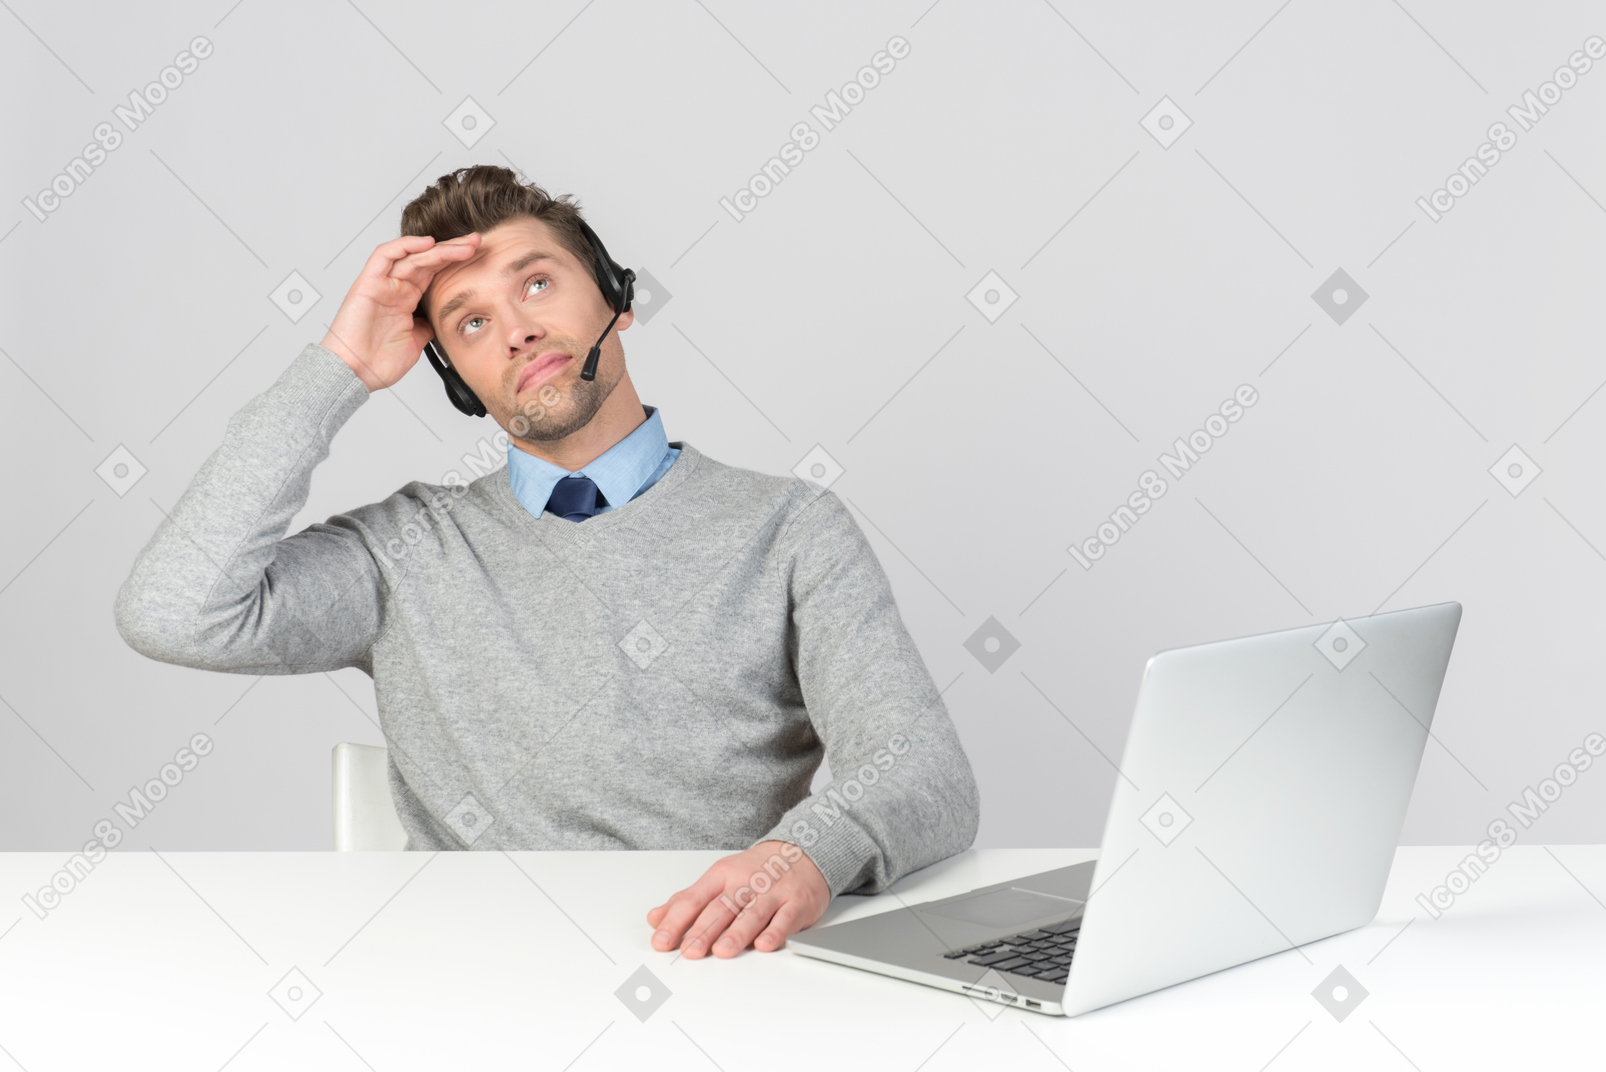 Call center agent sitting at office desk and looking up